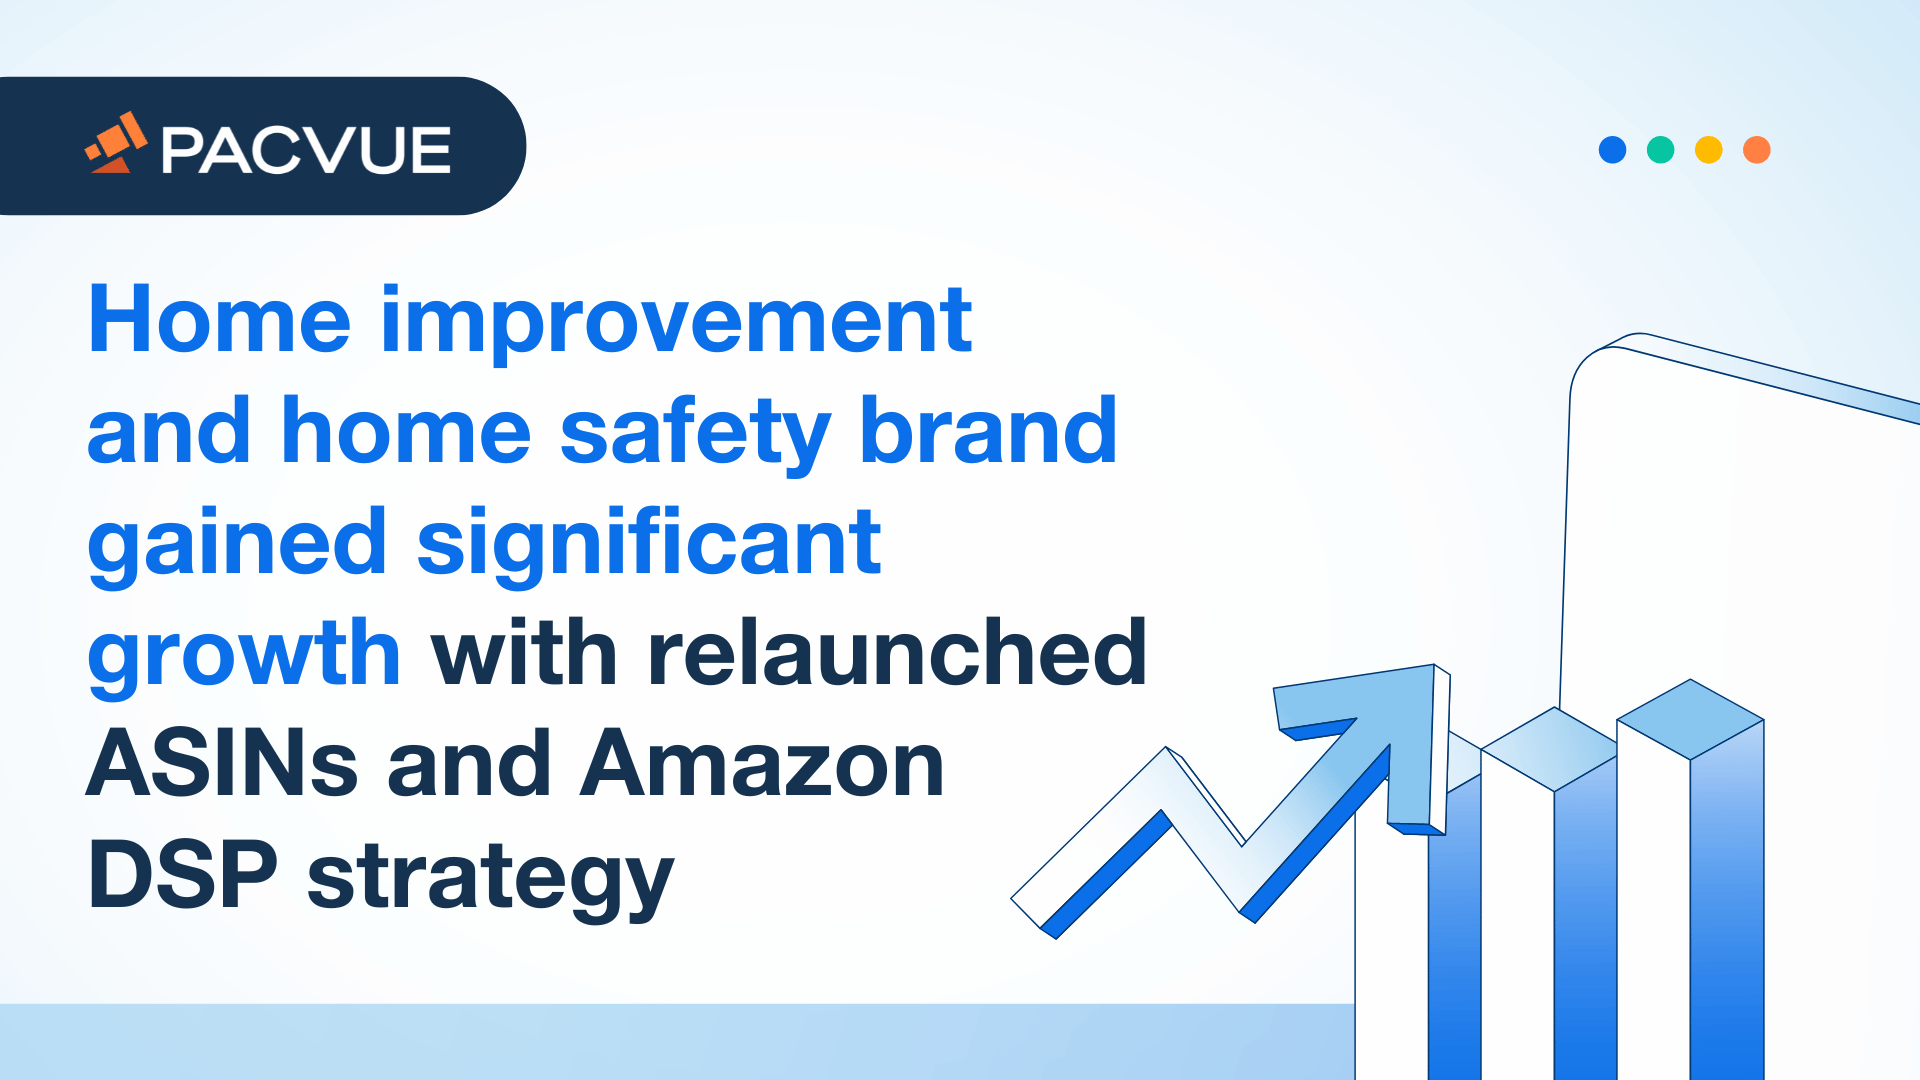 Home improvement and home safety brand gained significant growth with relaunched ASINs and Amazon DSP strategy